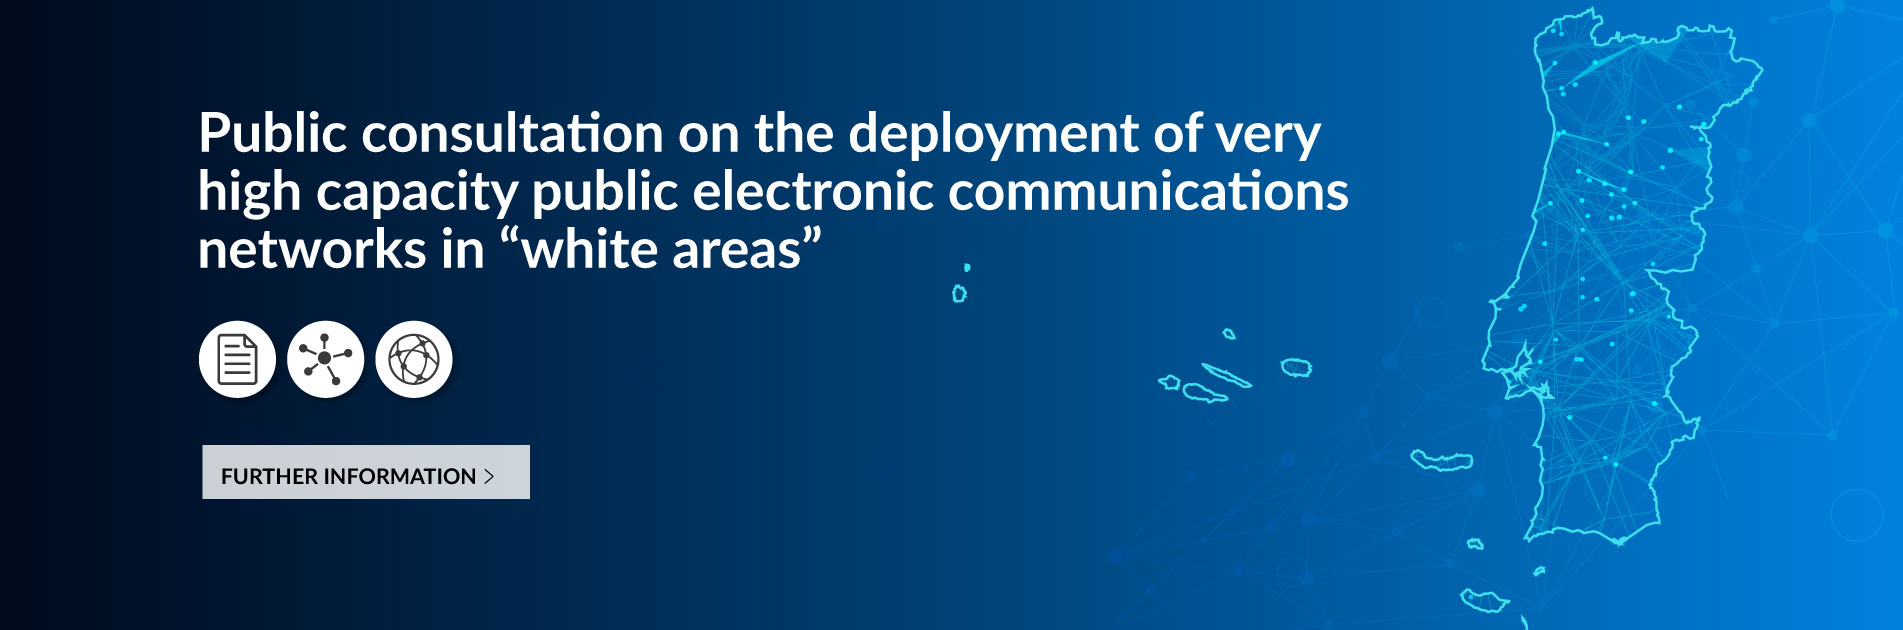 Public consultation on the deployment of very high capacity public electronic communications networks in "white areas"